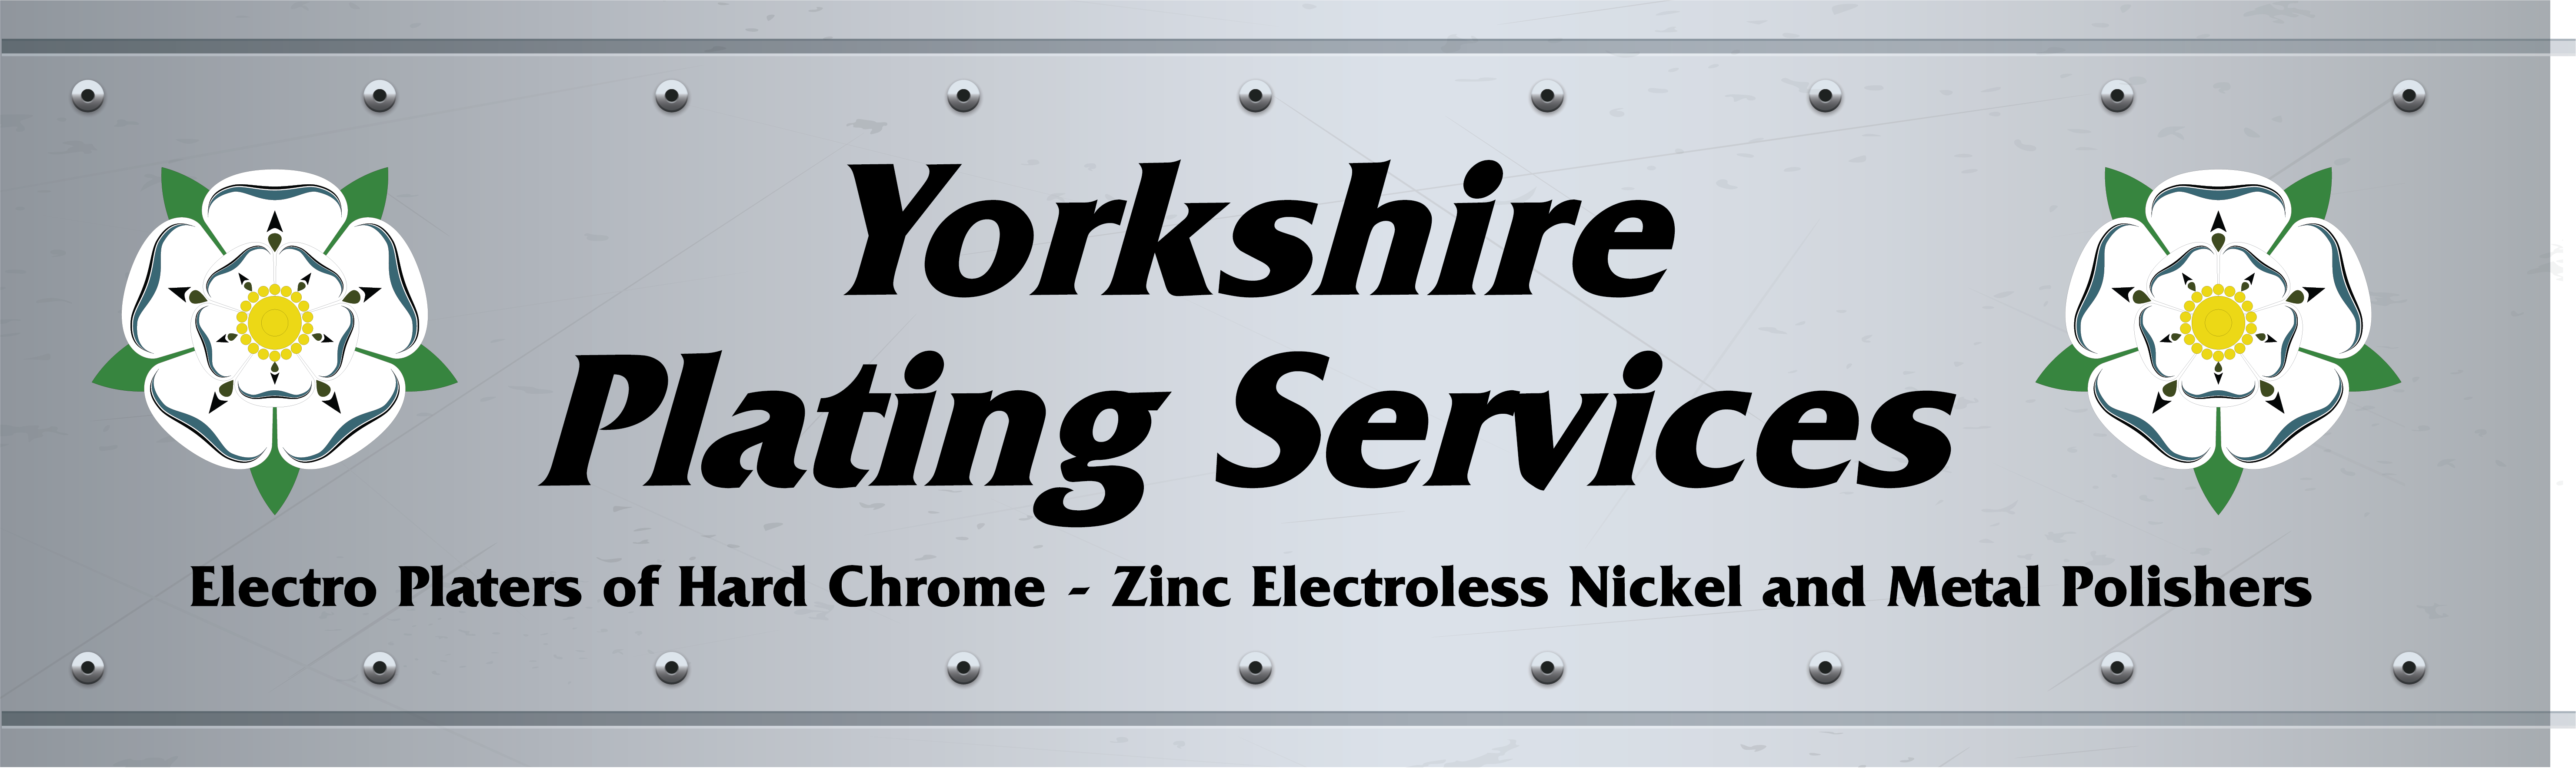 Yorkshire Plating Services